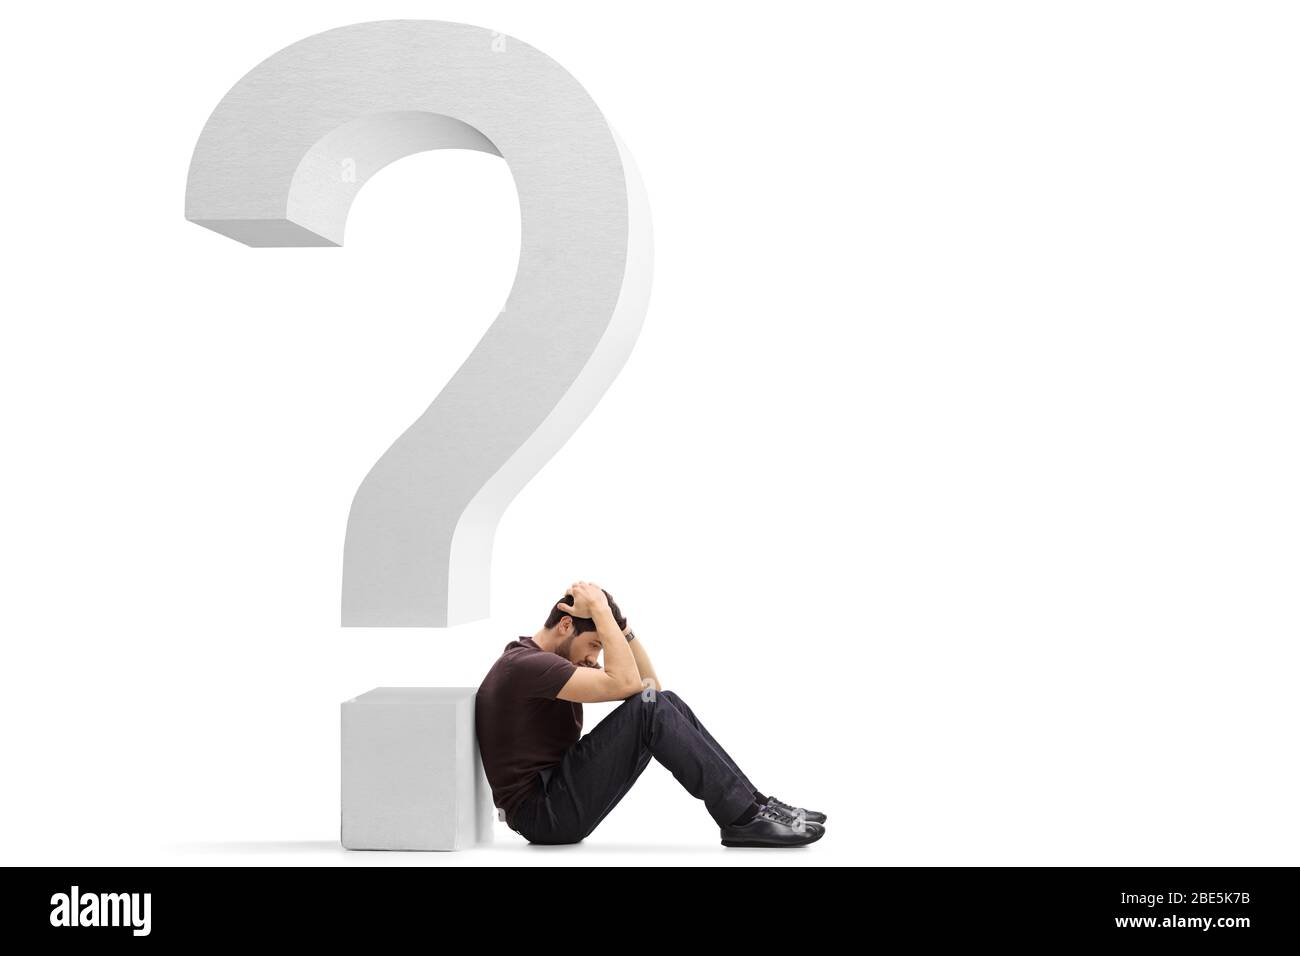 Sad young man sitting on the floor holding his head and leaning against a big question mark isolated on white background Stock Photo